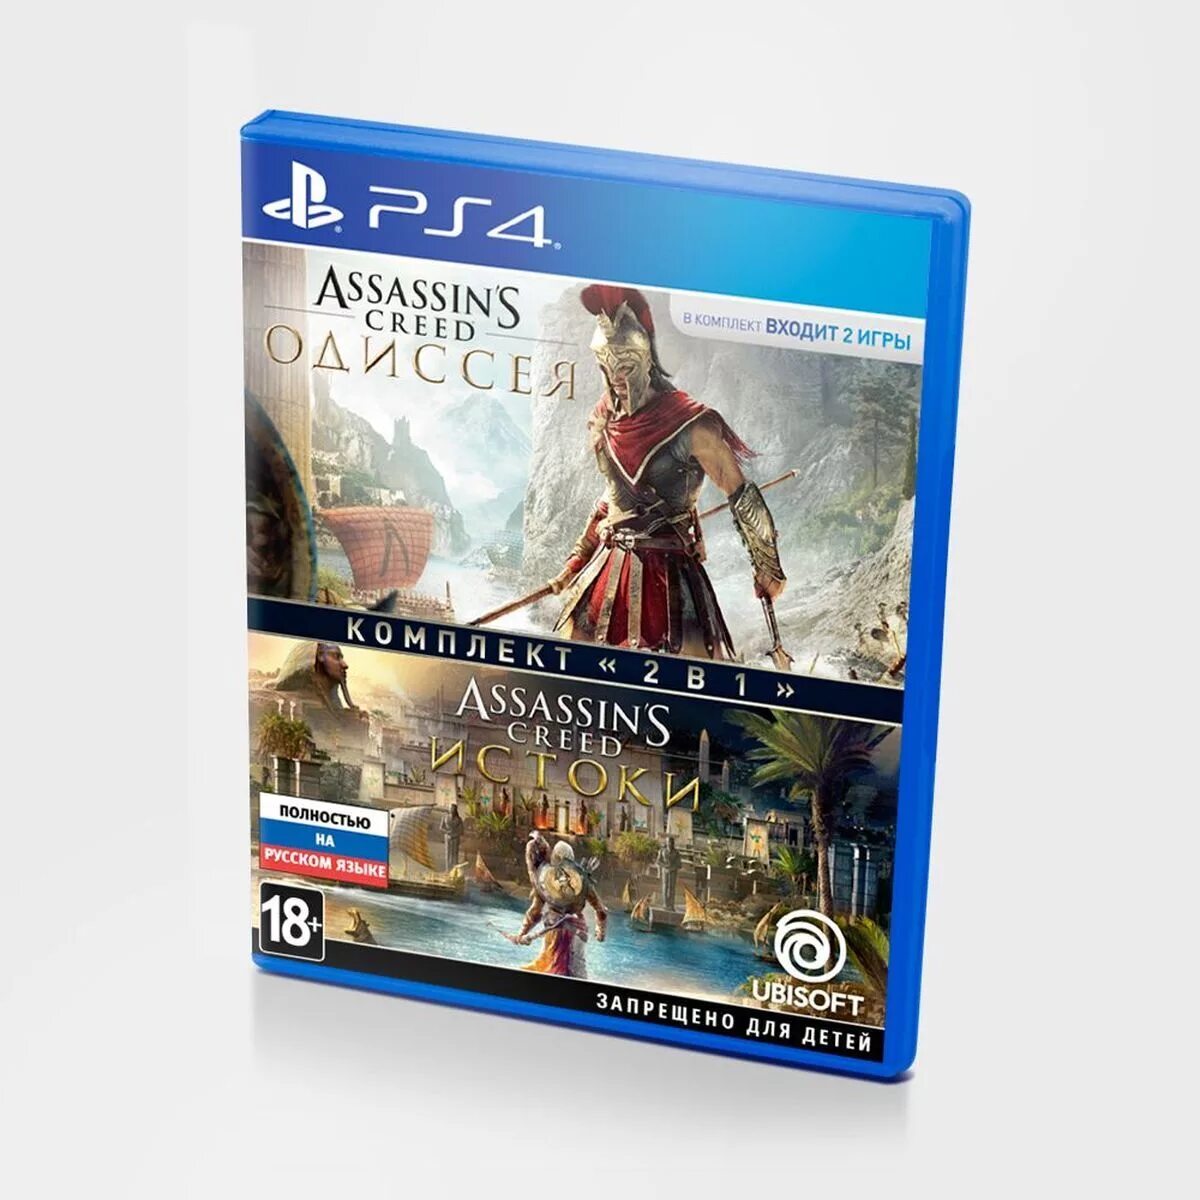 Ps4 диск Assassins Creed. Assassin's Creed Odyssey ps4 диск. Ассасин Истоки диск ps4. Ассасин Истоки Одиссея 2в1 диск. Ассасин игры пс4